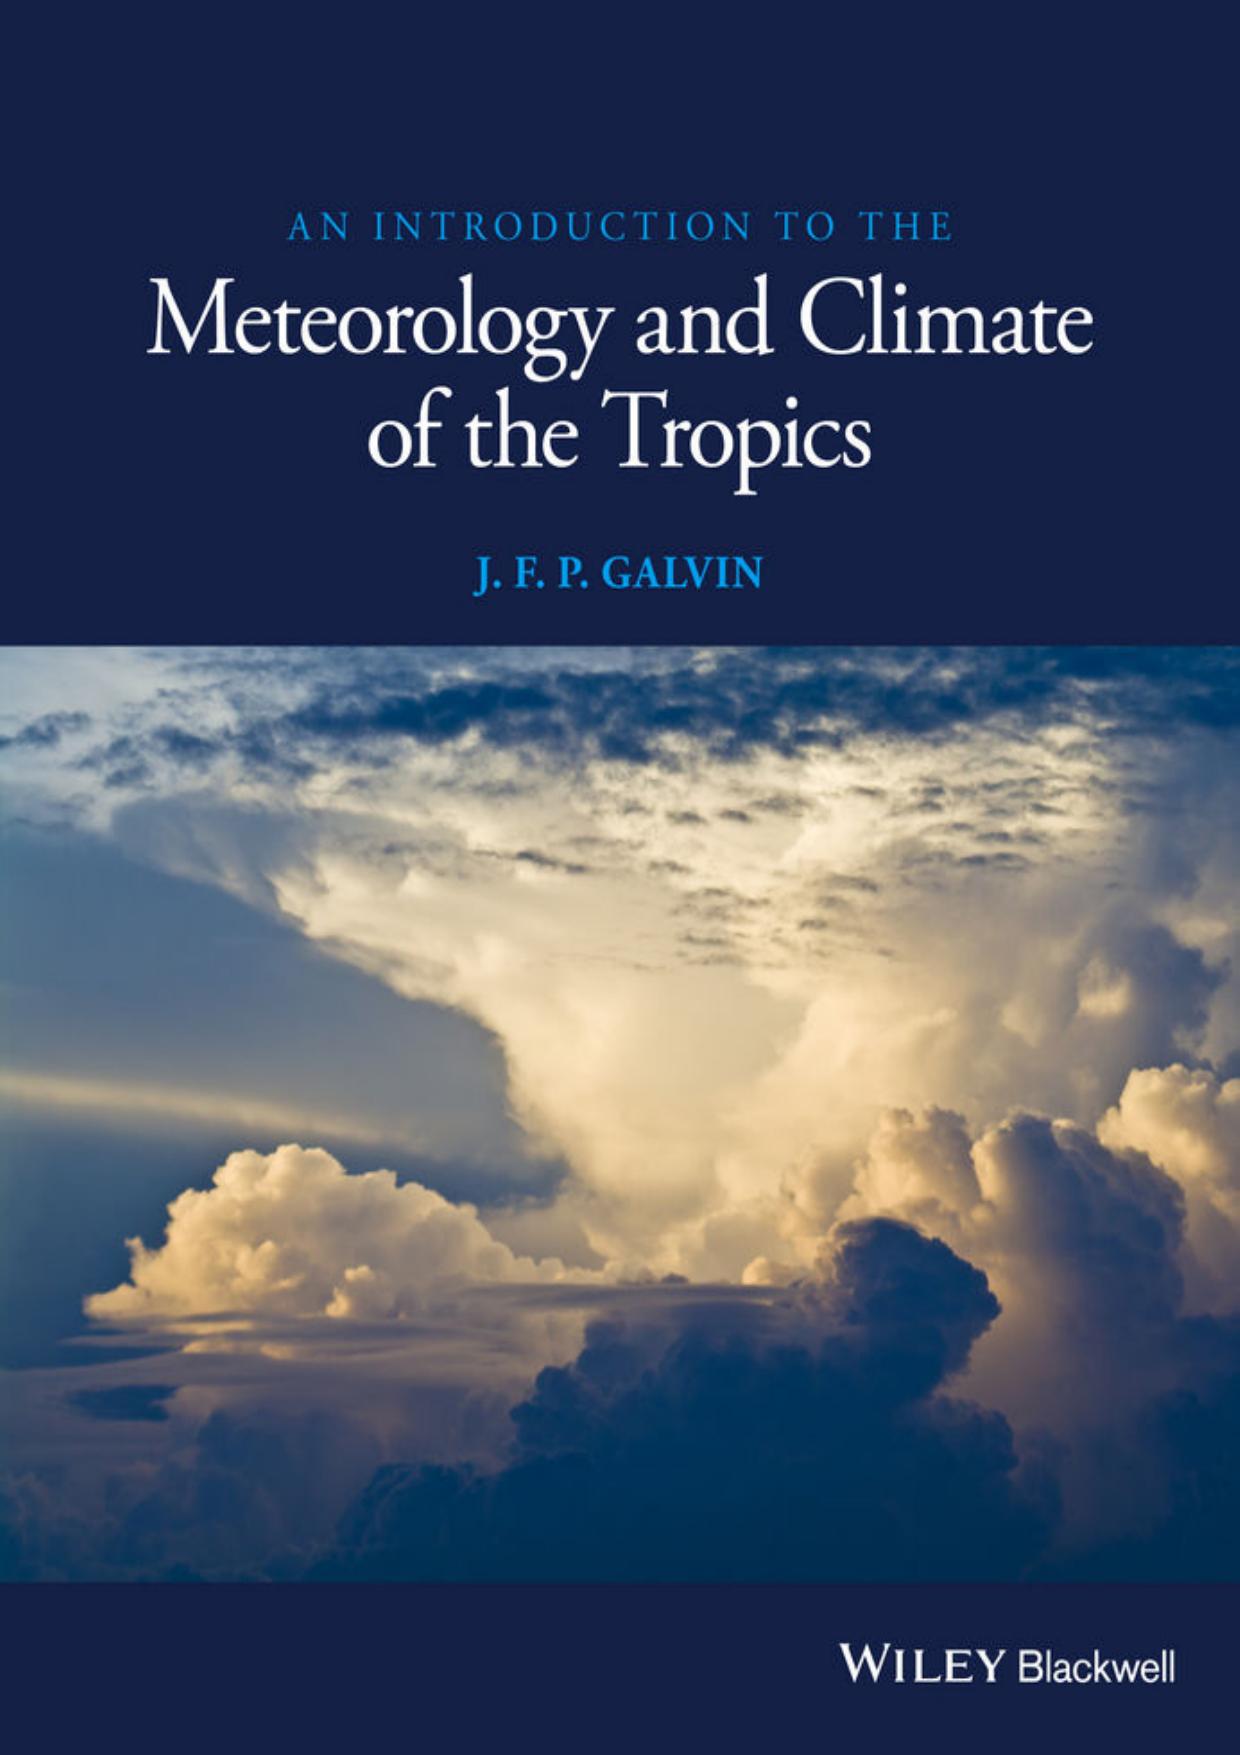 An Introduction to the Meteorology and Climate of the Tropics by J. F. P. Galvin